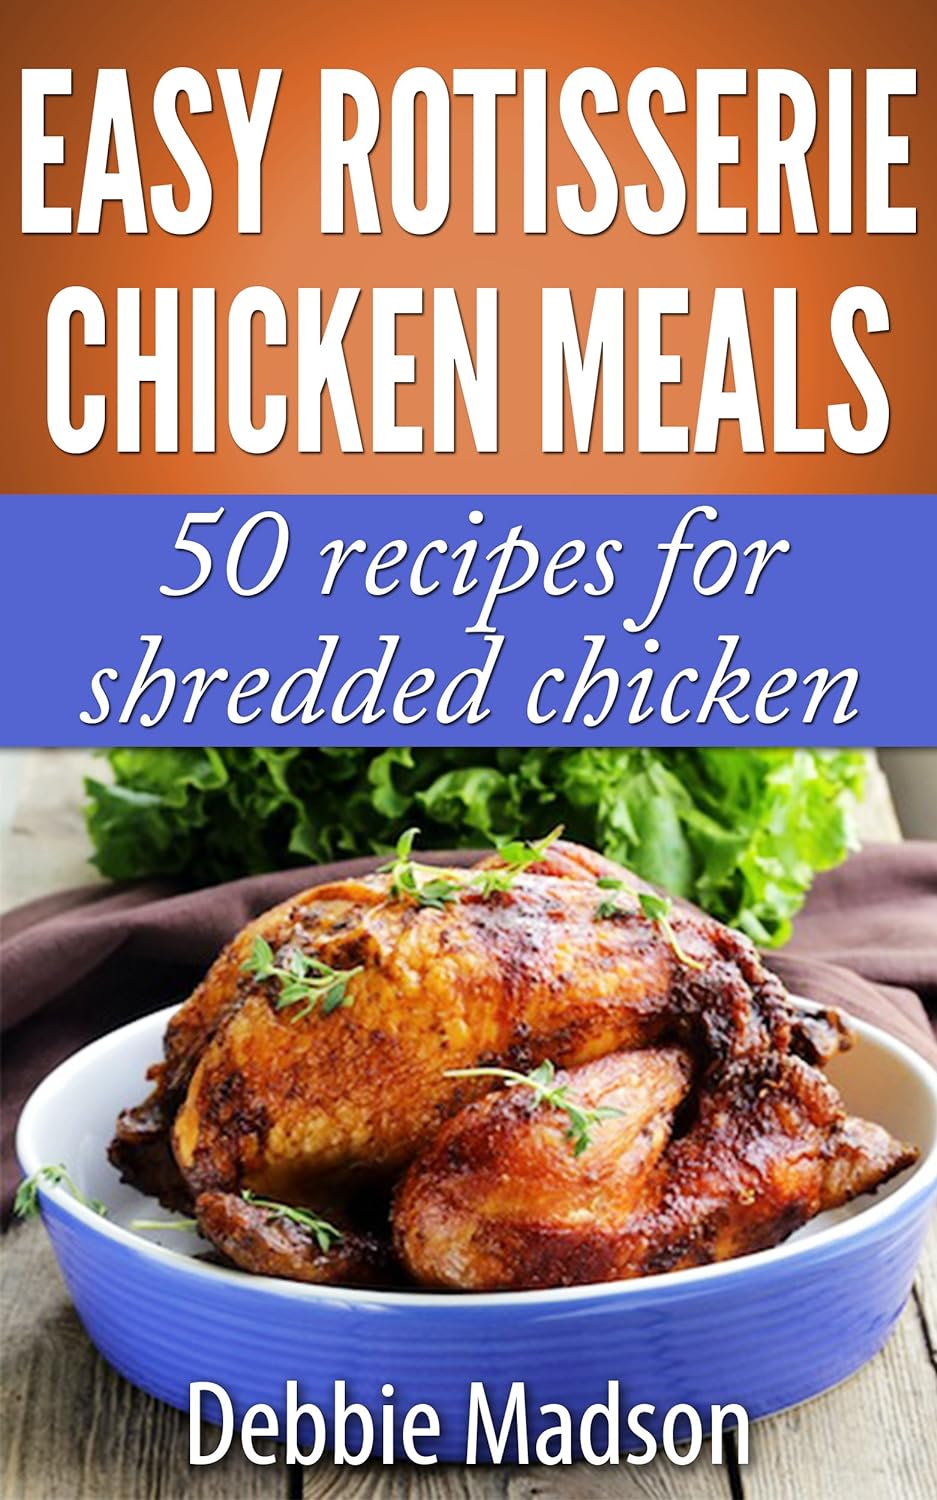 Free Amazon Cookbooks: Rotisserie Chicken, Texas Mexican, Chocolate, Famous Restaurant, AI, Greek, Cuba, Pioneer, Slow Cooker, Crab, Appalachian, Air Fryer, Beef, KC, Vintage, MORE